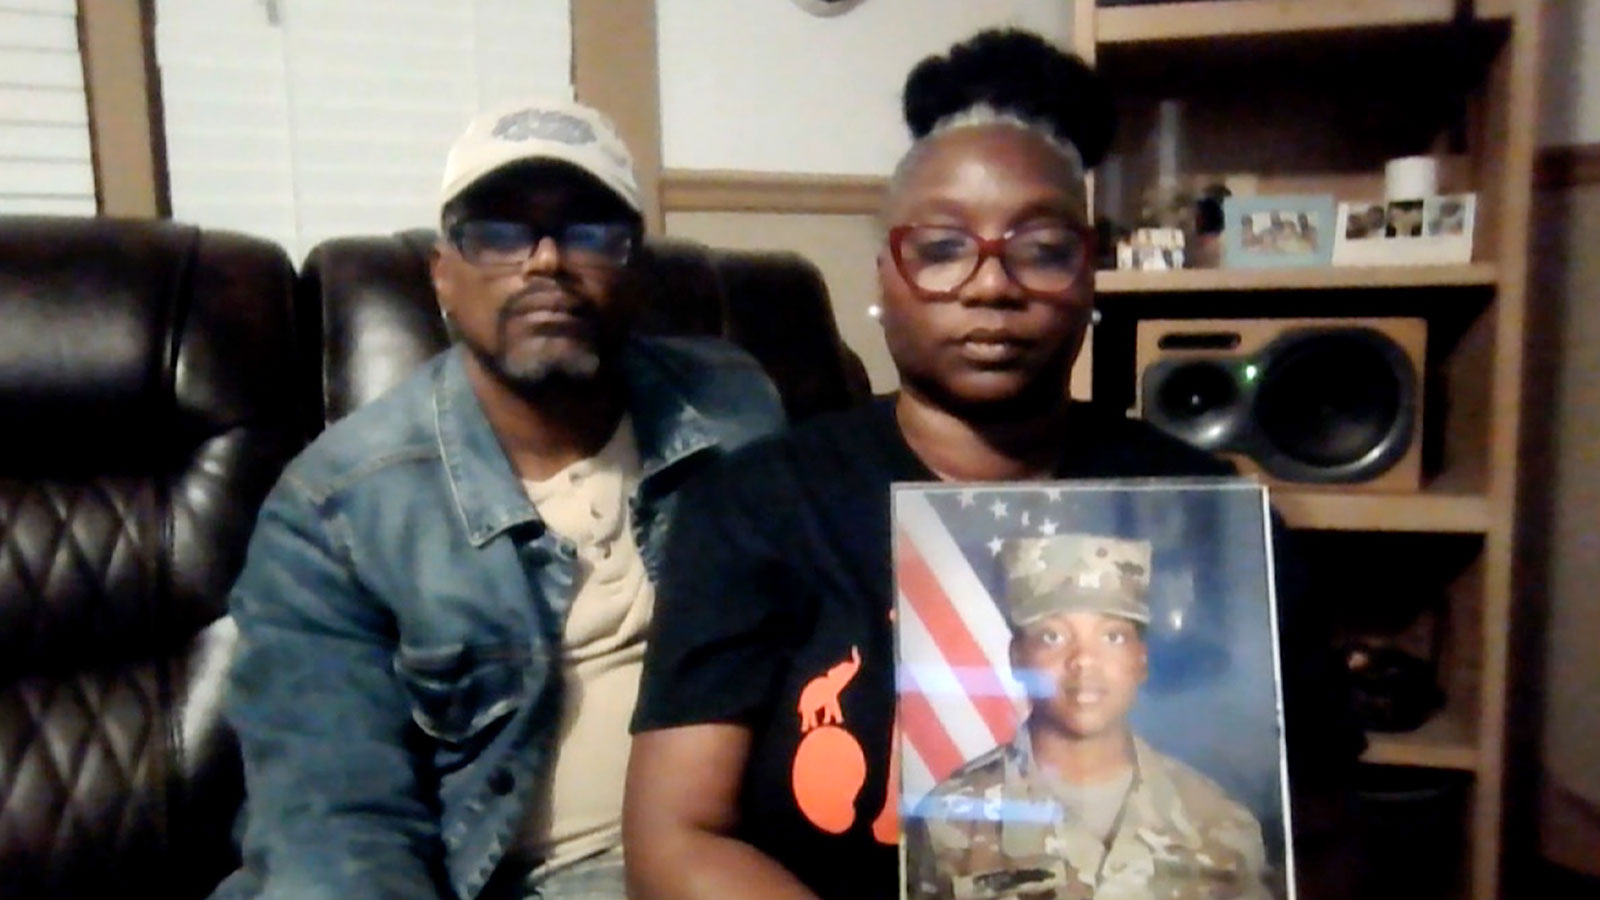  Shawn Sanders and Oneida Oliver-Sanders hold a photo of their daughter, Army Specialist Kennedy Sanders.